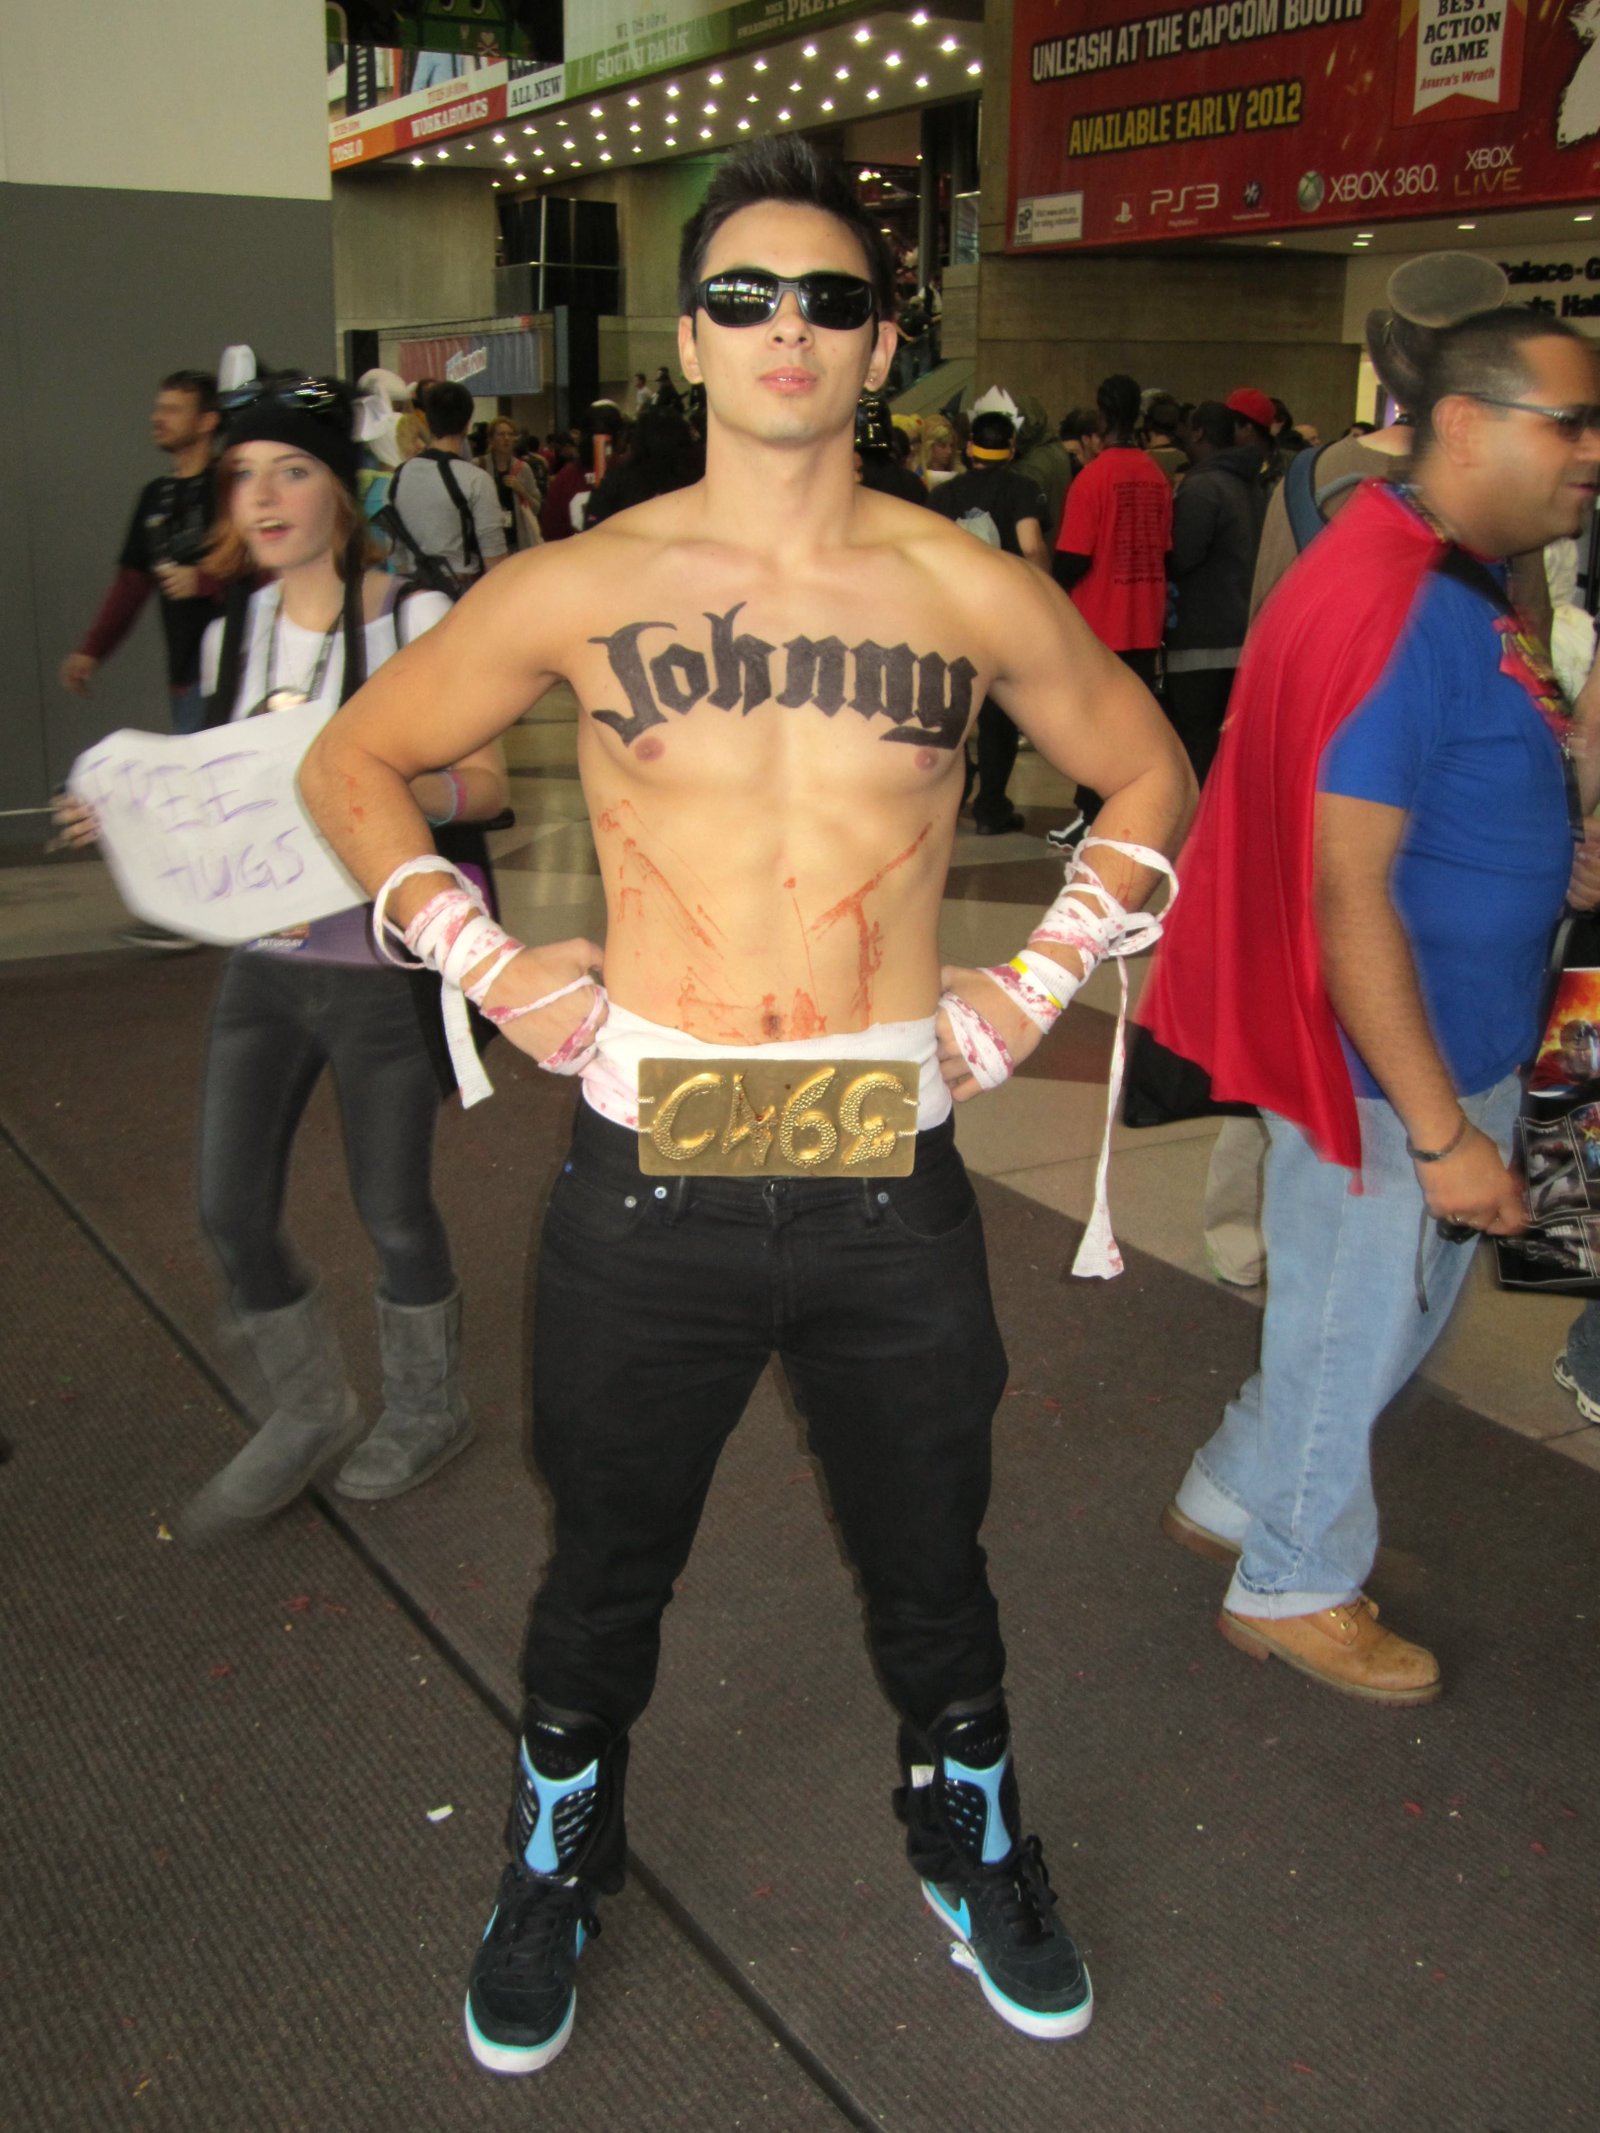 10-18-2011-NYCC-2011-Cage.jpg